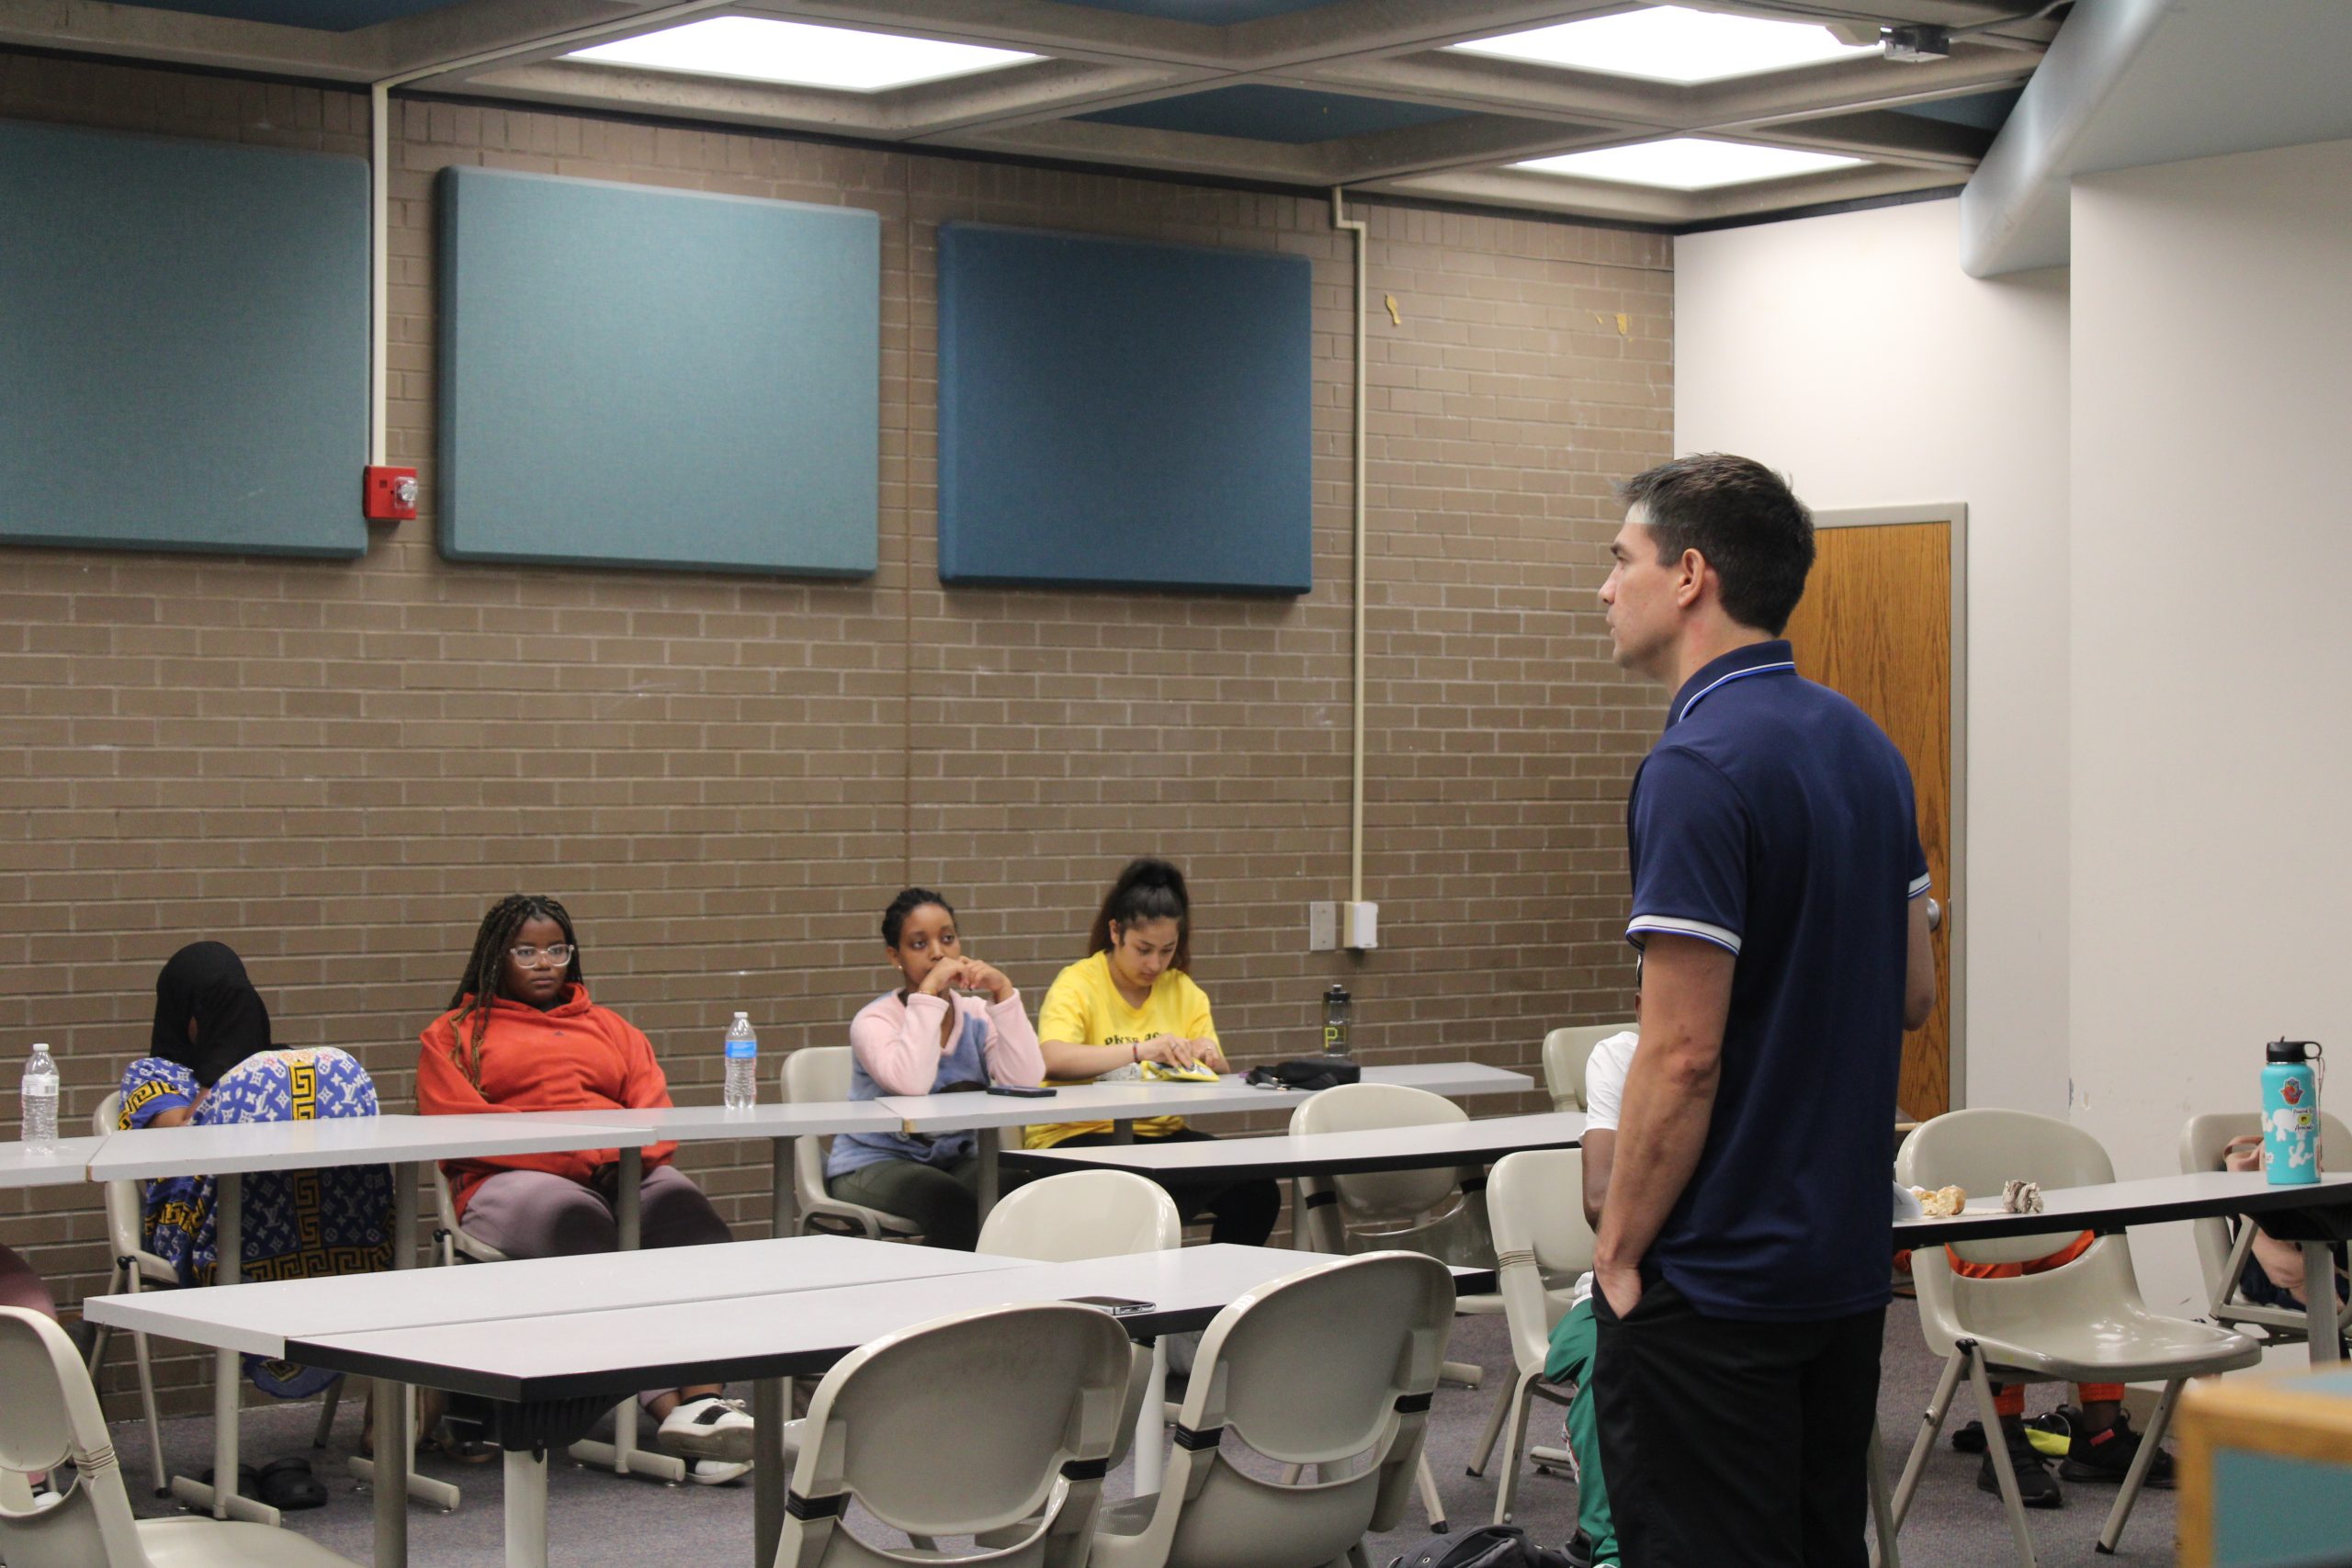 Image of Javier, our staff person, teaching a class of teens about financial education. A row of teens sit along a long grey table at the back of the room, while we see Javier's back. He wears a blue polo shirt.